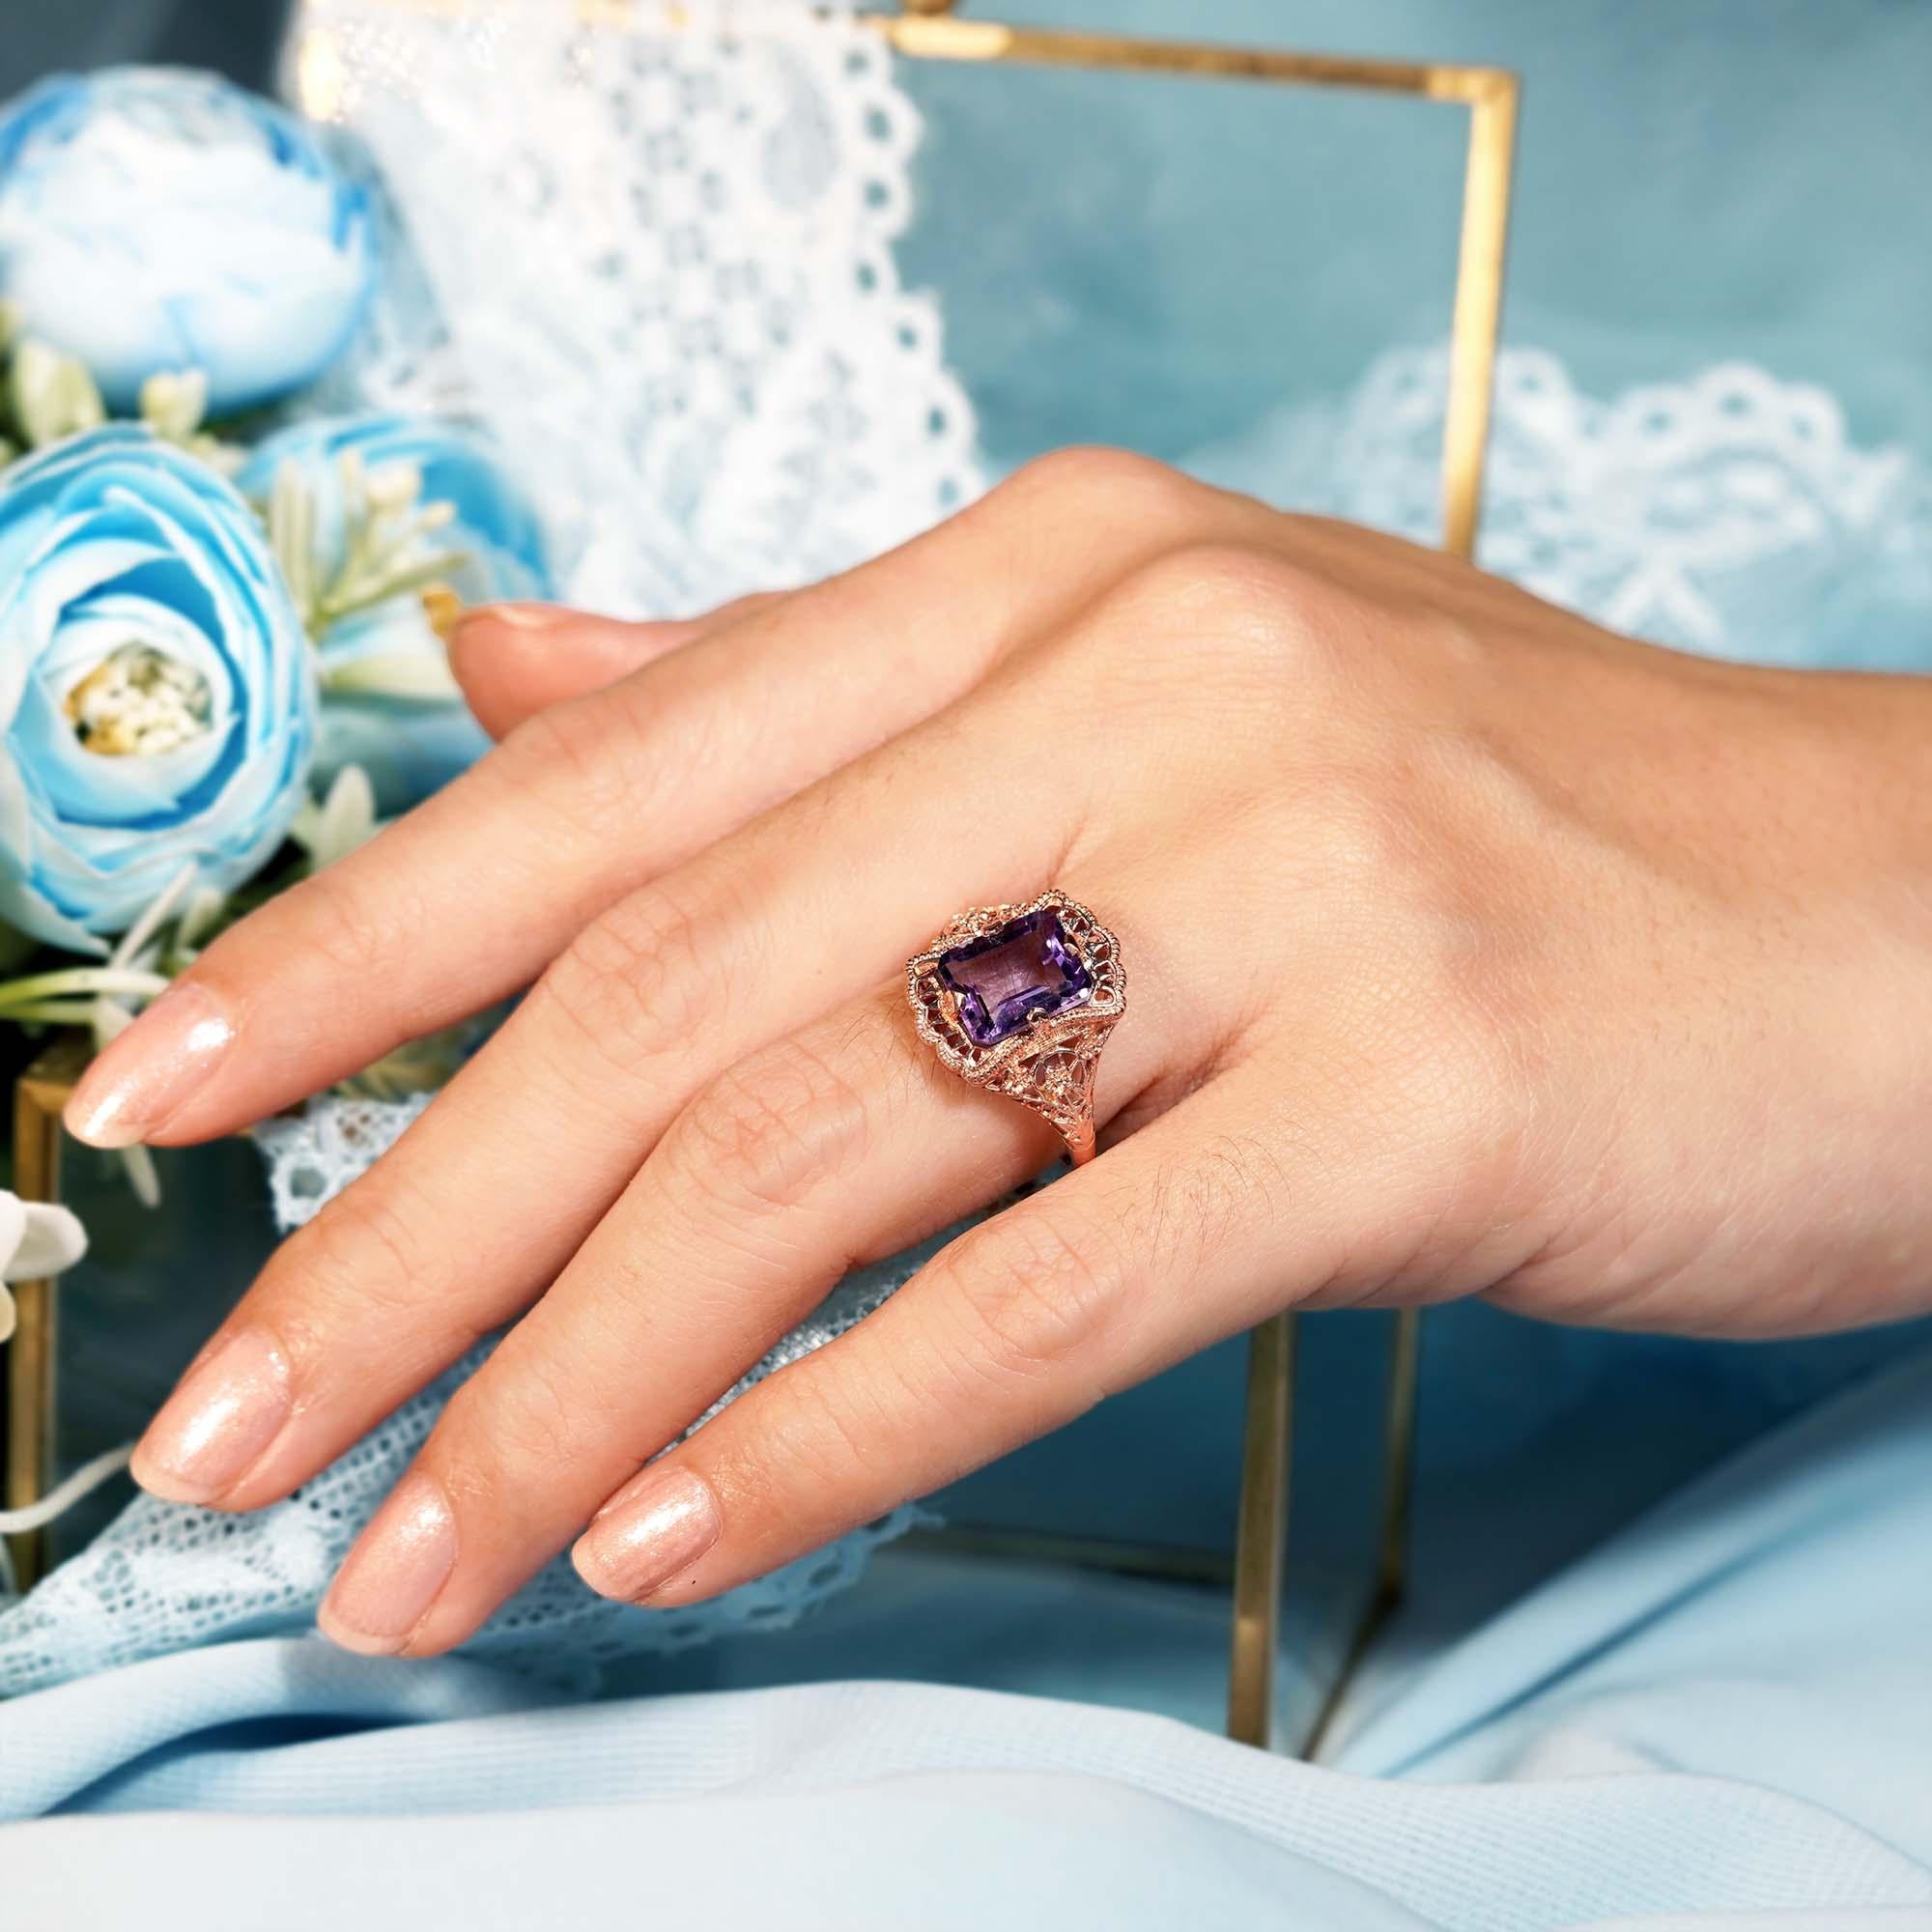 For Sale:  3.5 Ct. Amethyst Vintage Style Filigree Cocktail Ring in Solid 9K Rose Gold 7